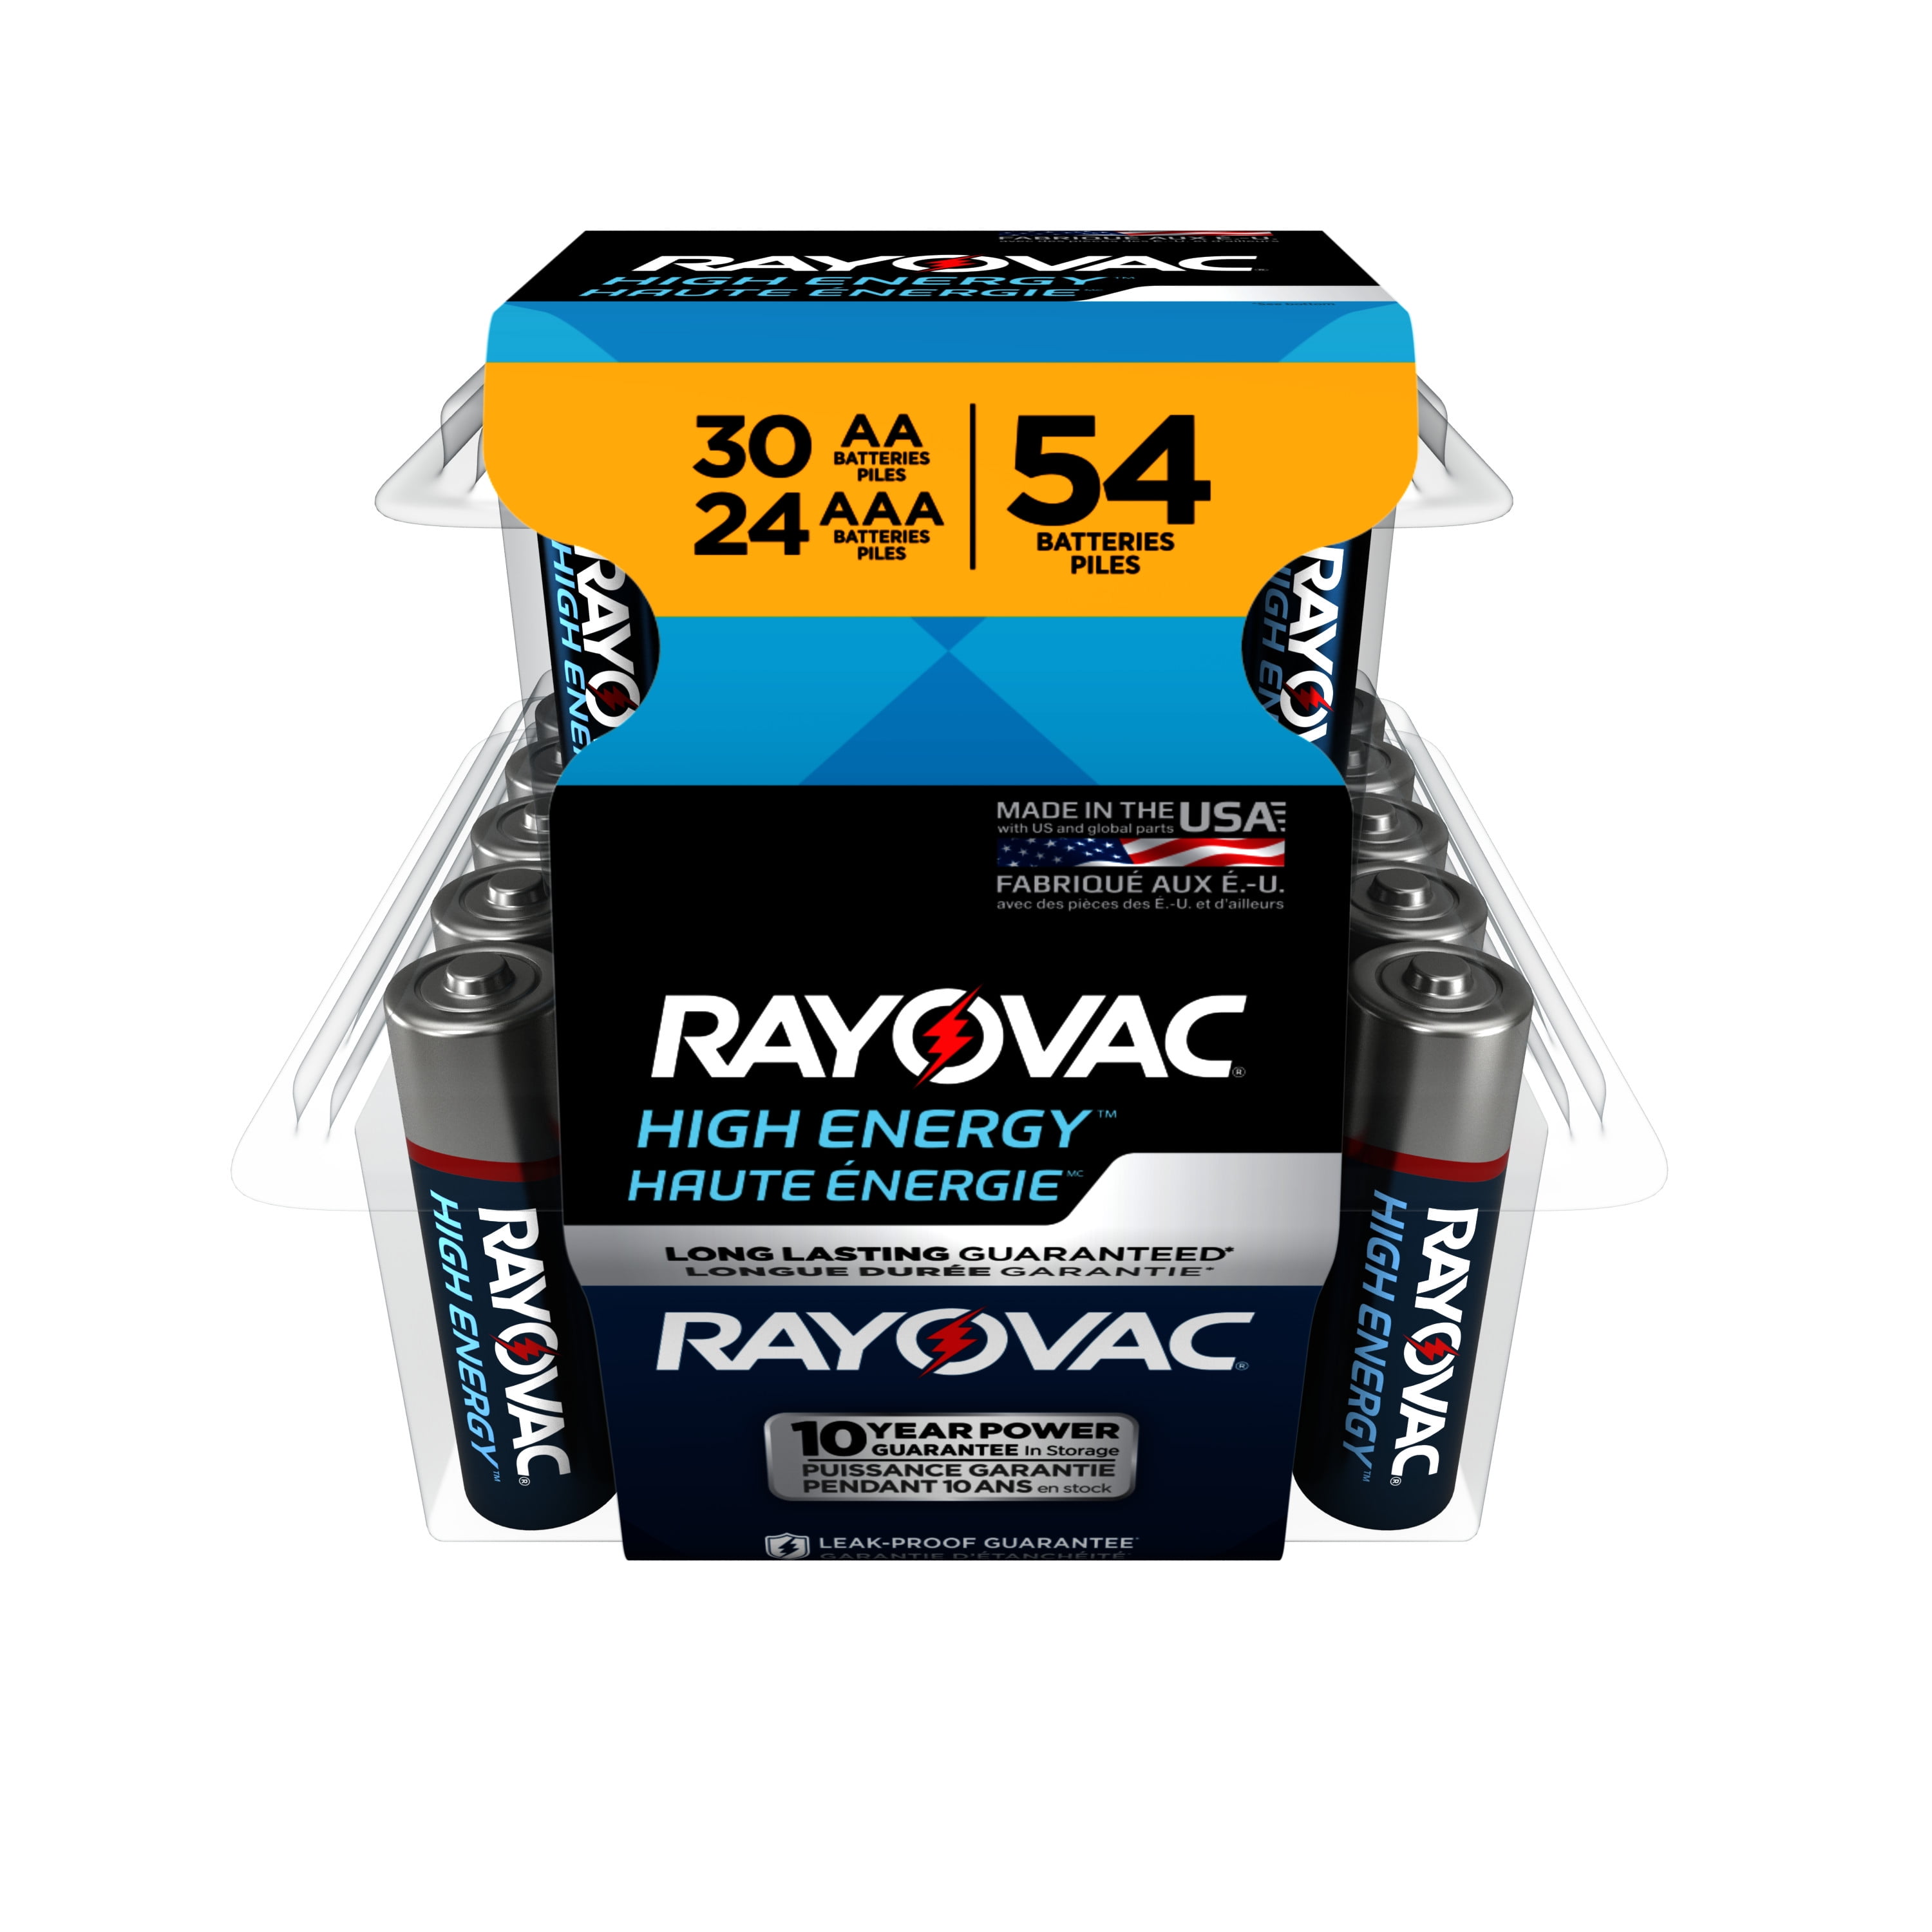 Holy smokes! Bundle of 240 AA and AAA batteries is 69% off